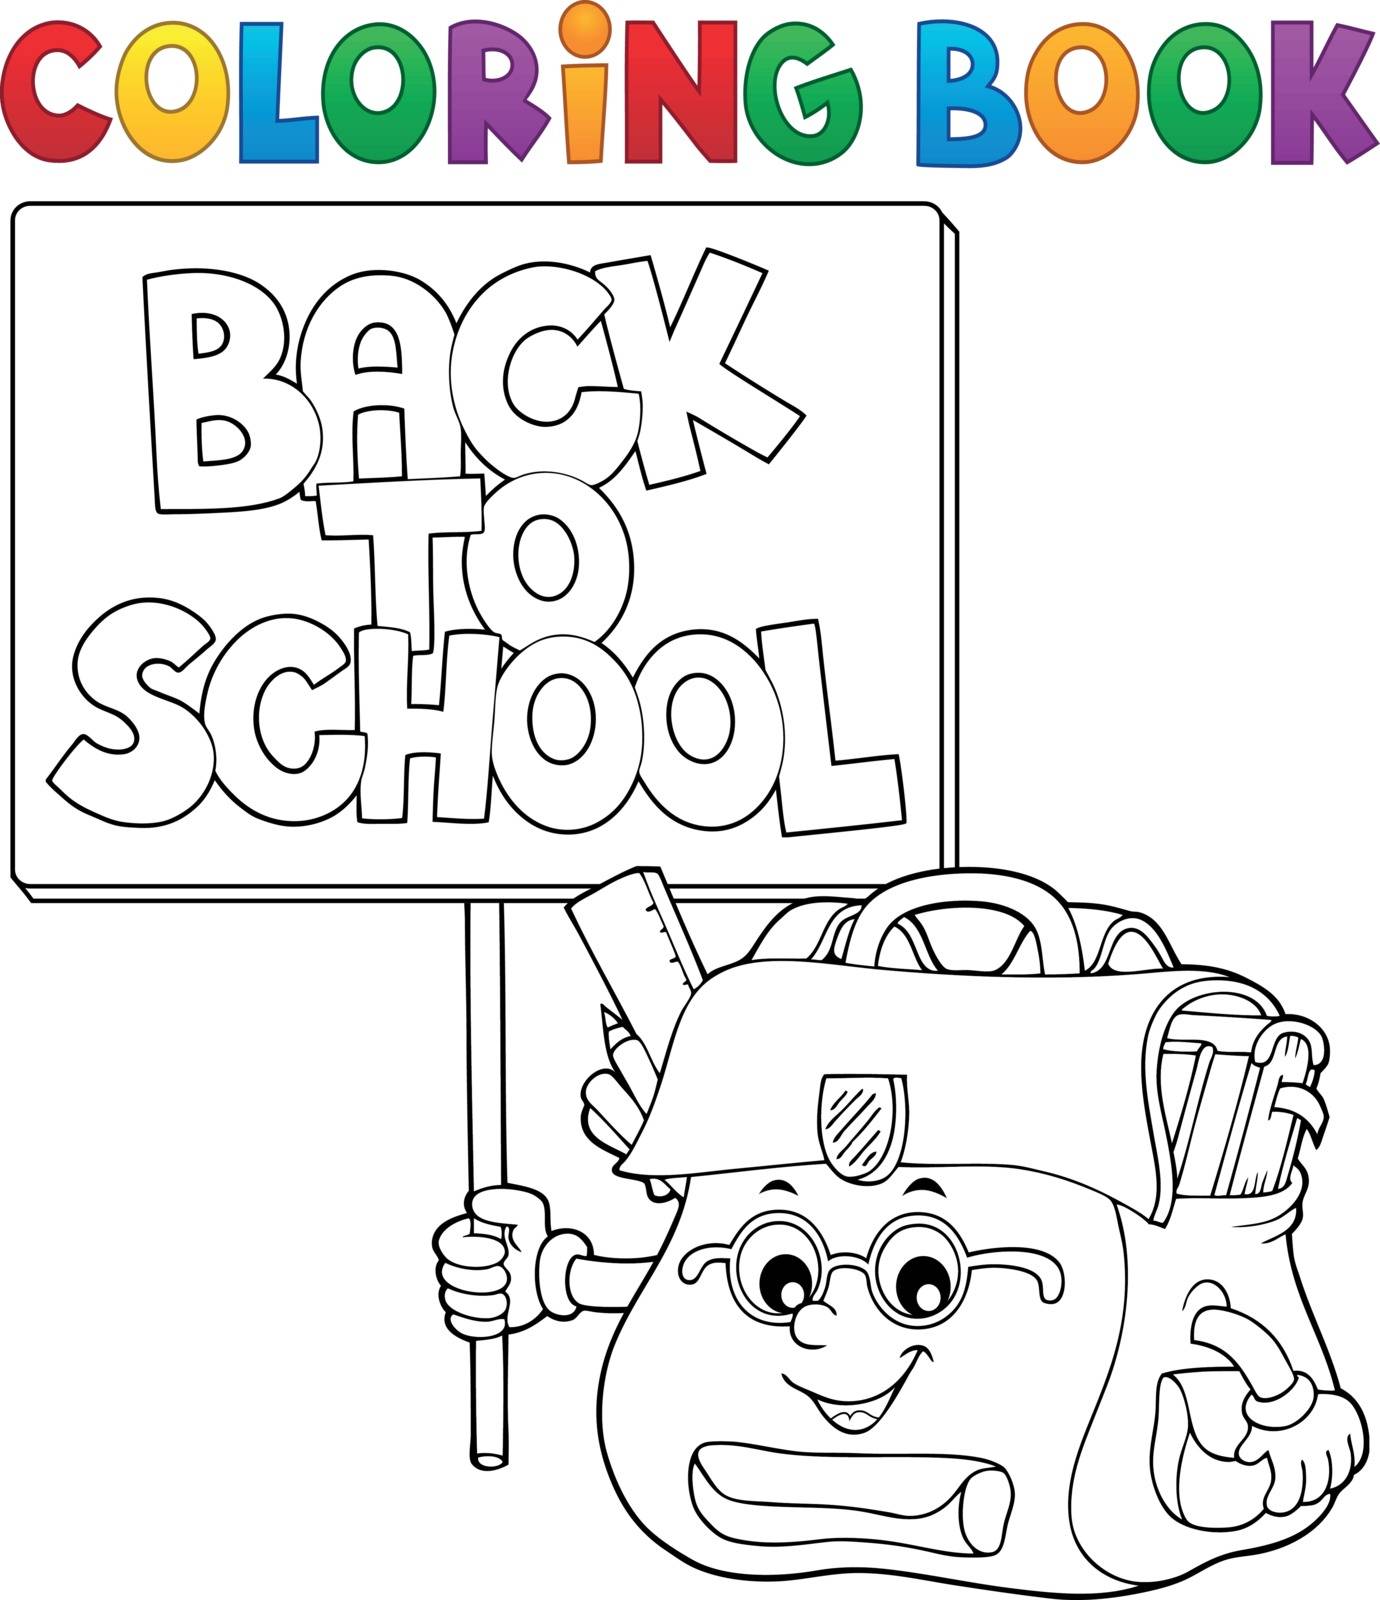 Coloring book schoolbag with sign - eps10 vector illustration.